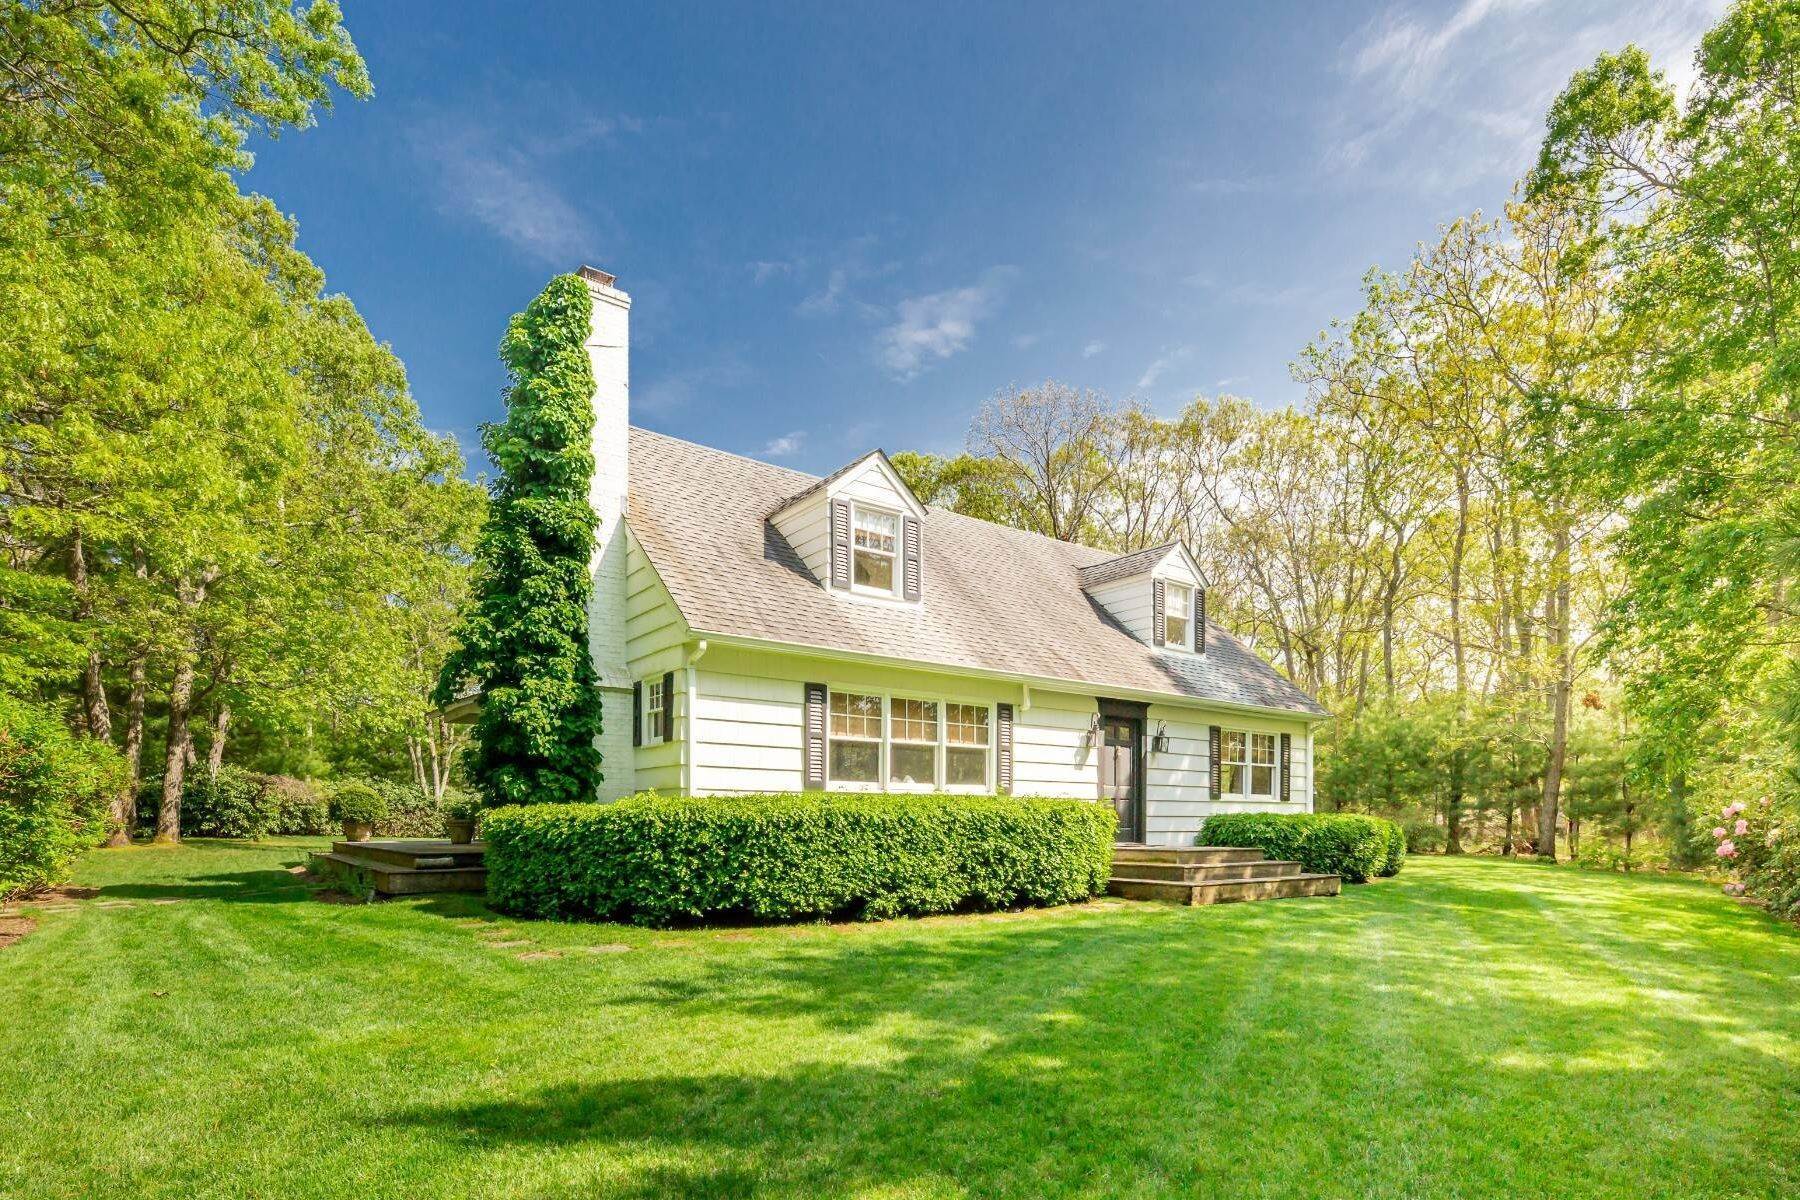 Single Family Homes for Sale at Supremely Stylish Cape with Magical Grounds Supremely Stylish Cape with Magical Grounds, East Hampton, New York 11937 United States